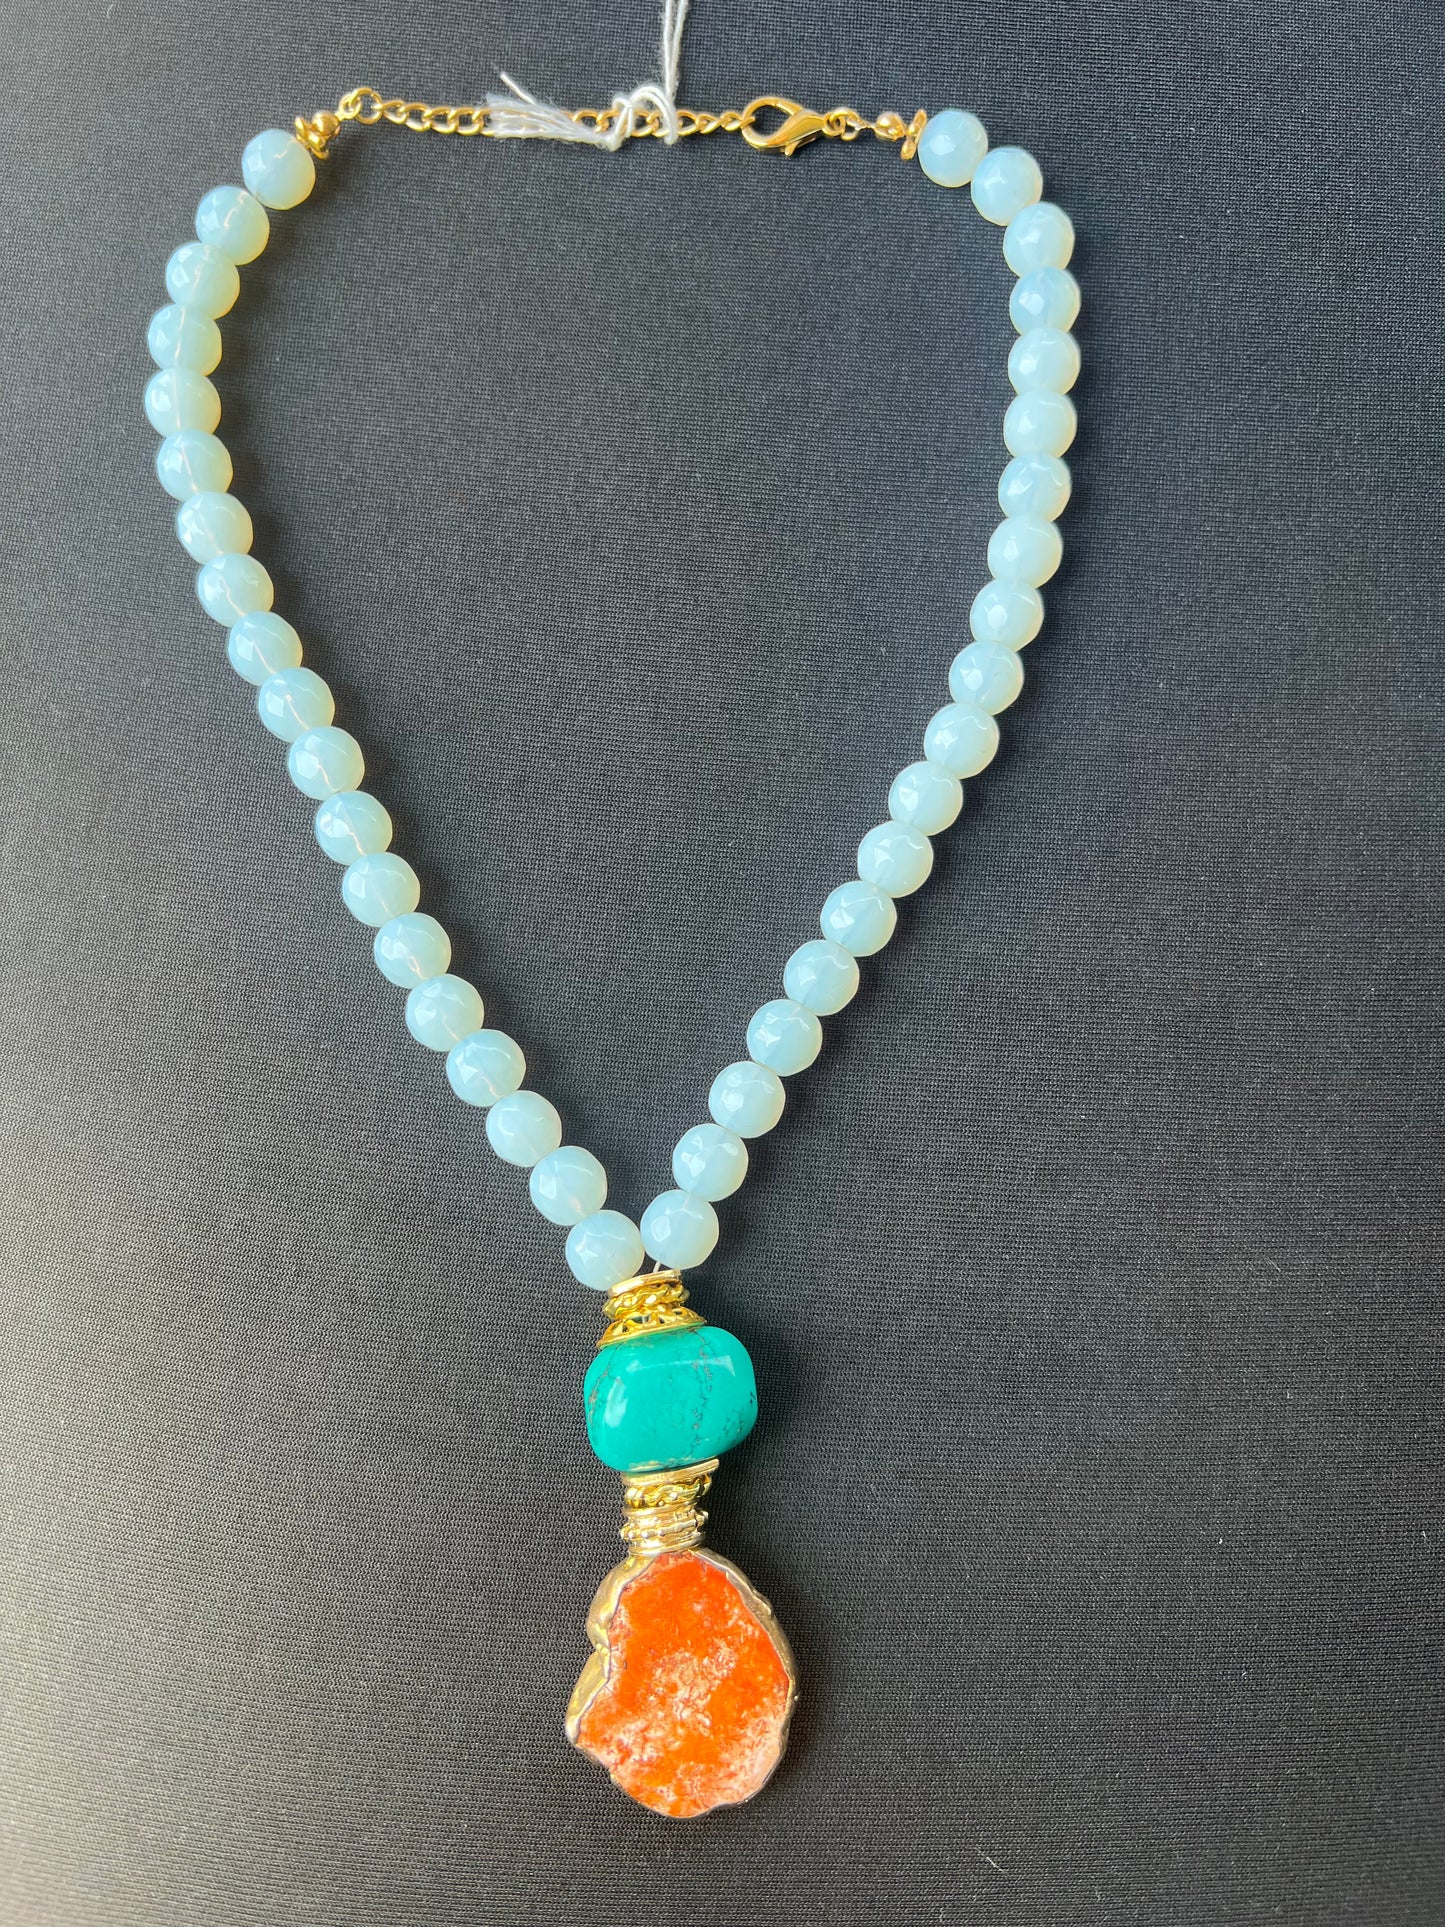 Beaded opal necklace